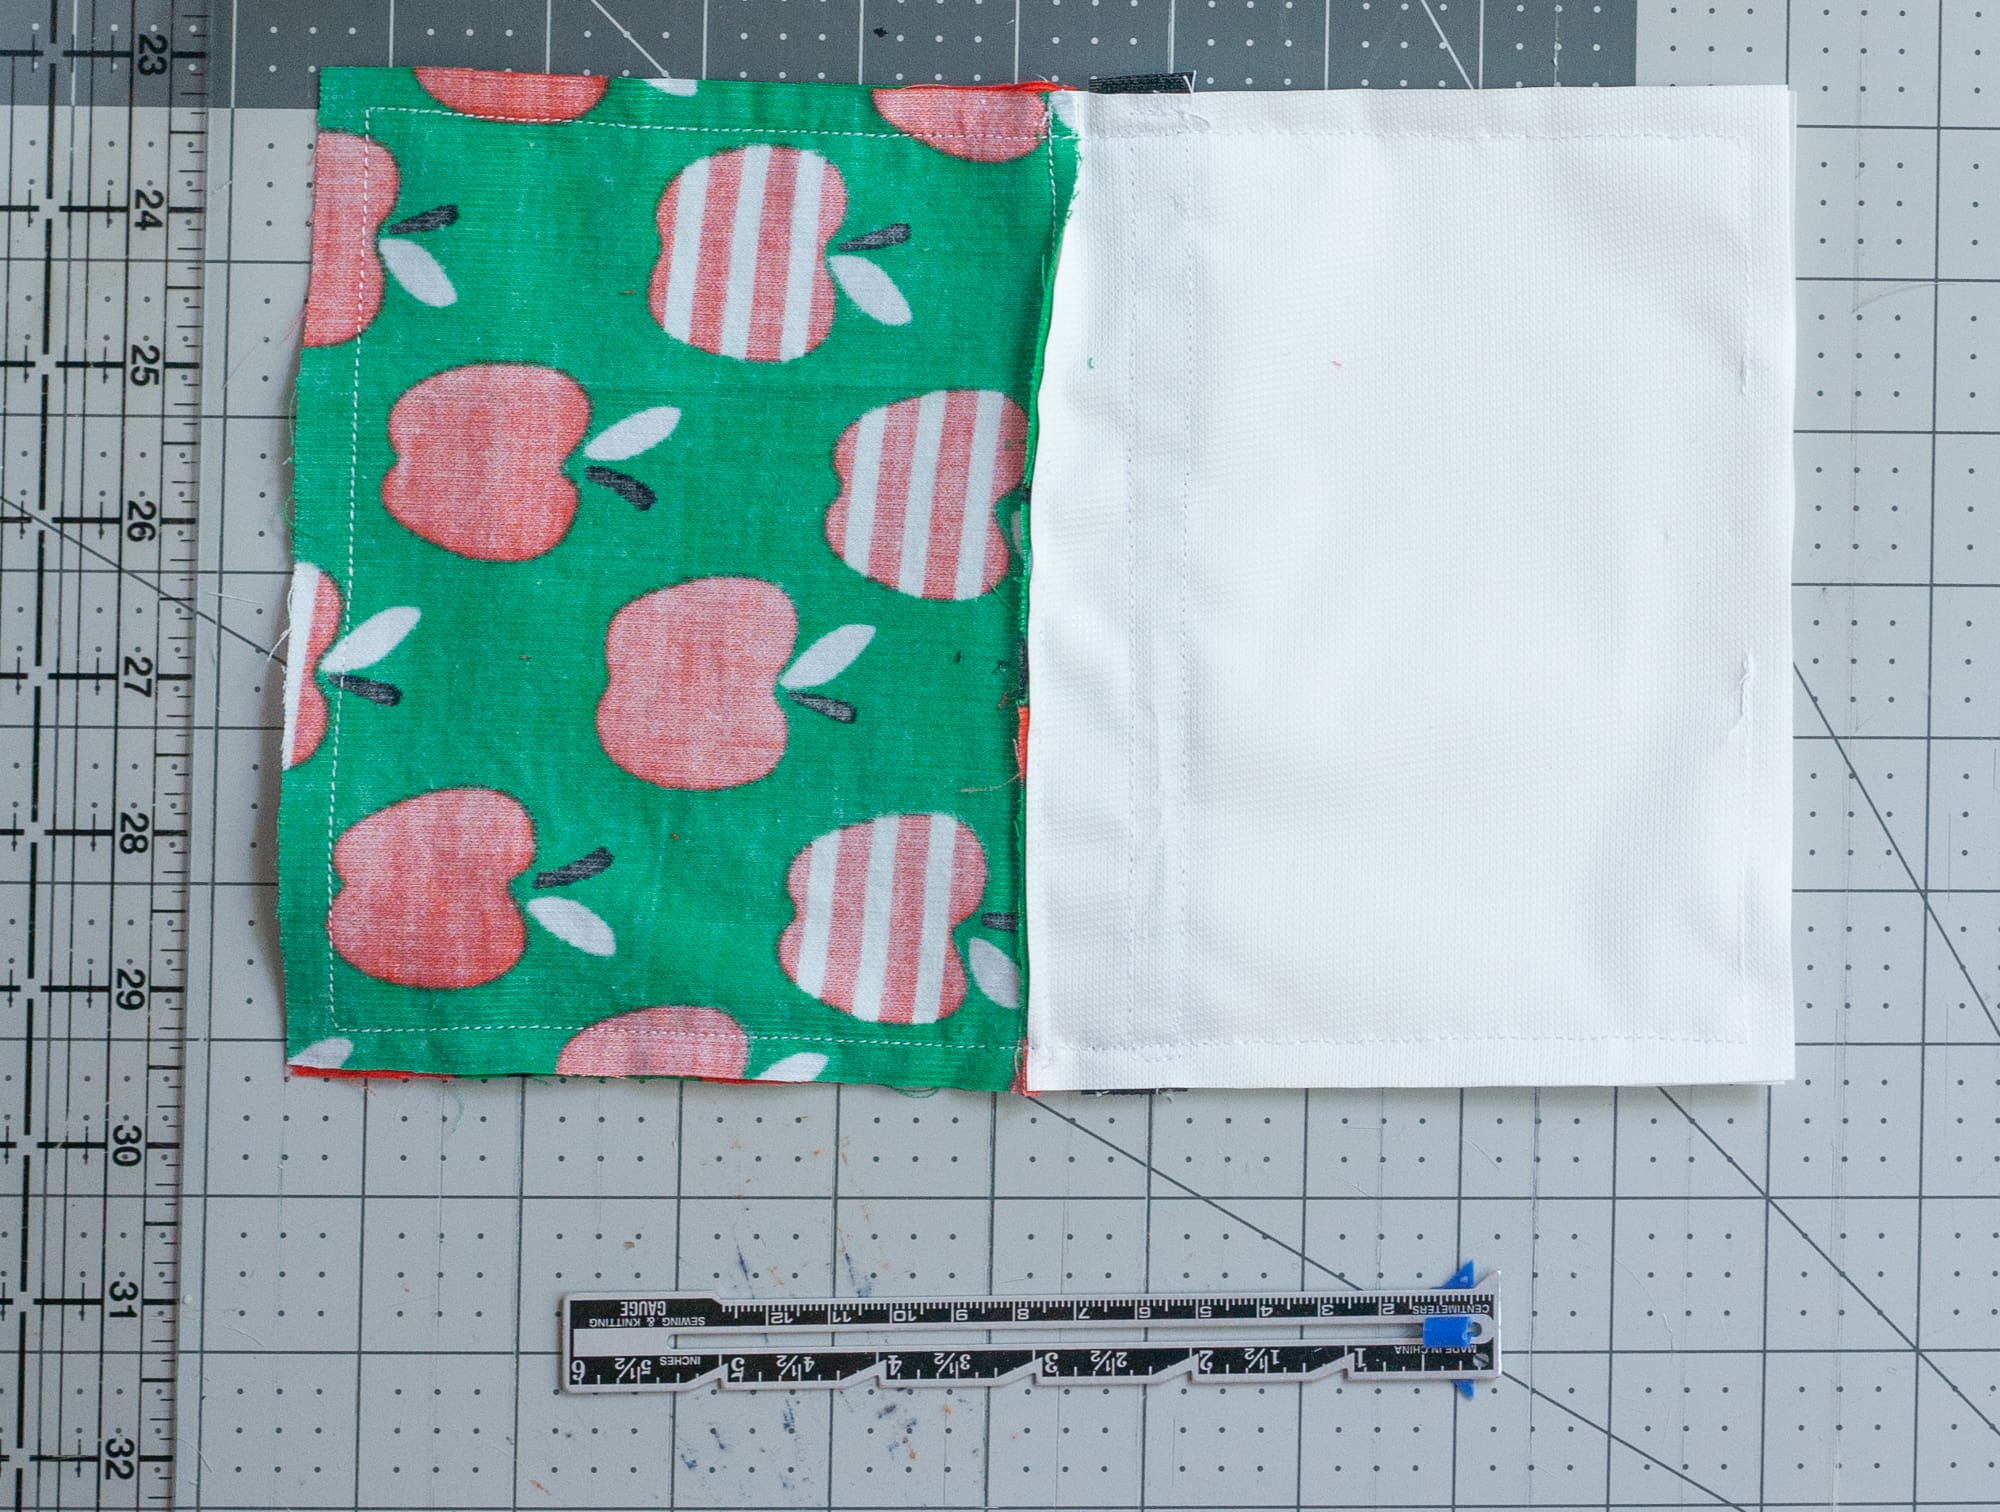 Pieces of fabric for small bags sewn together